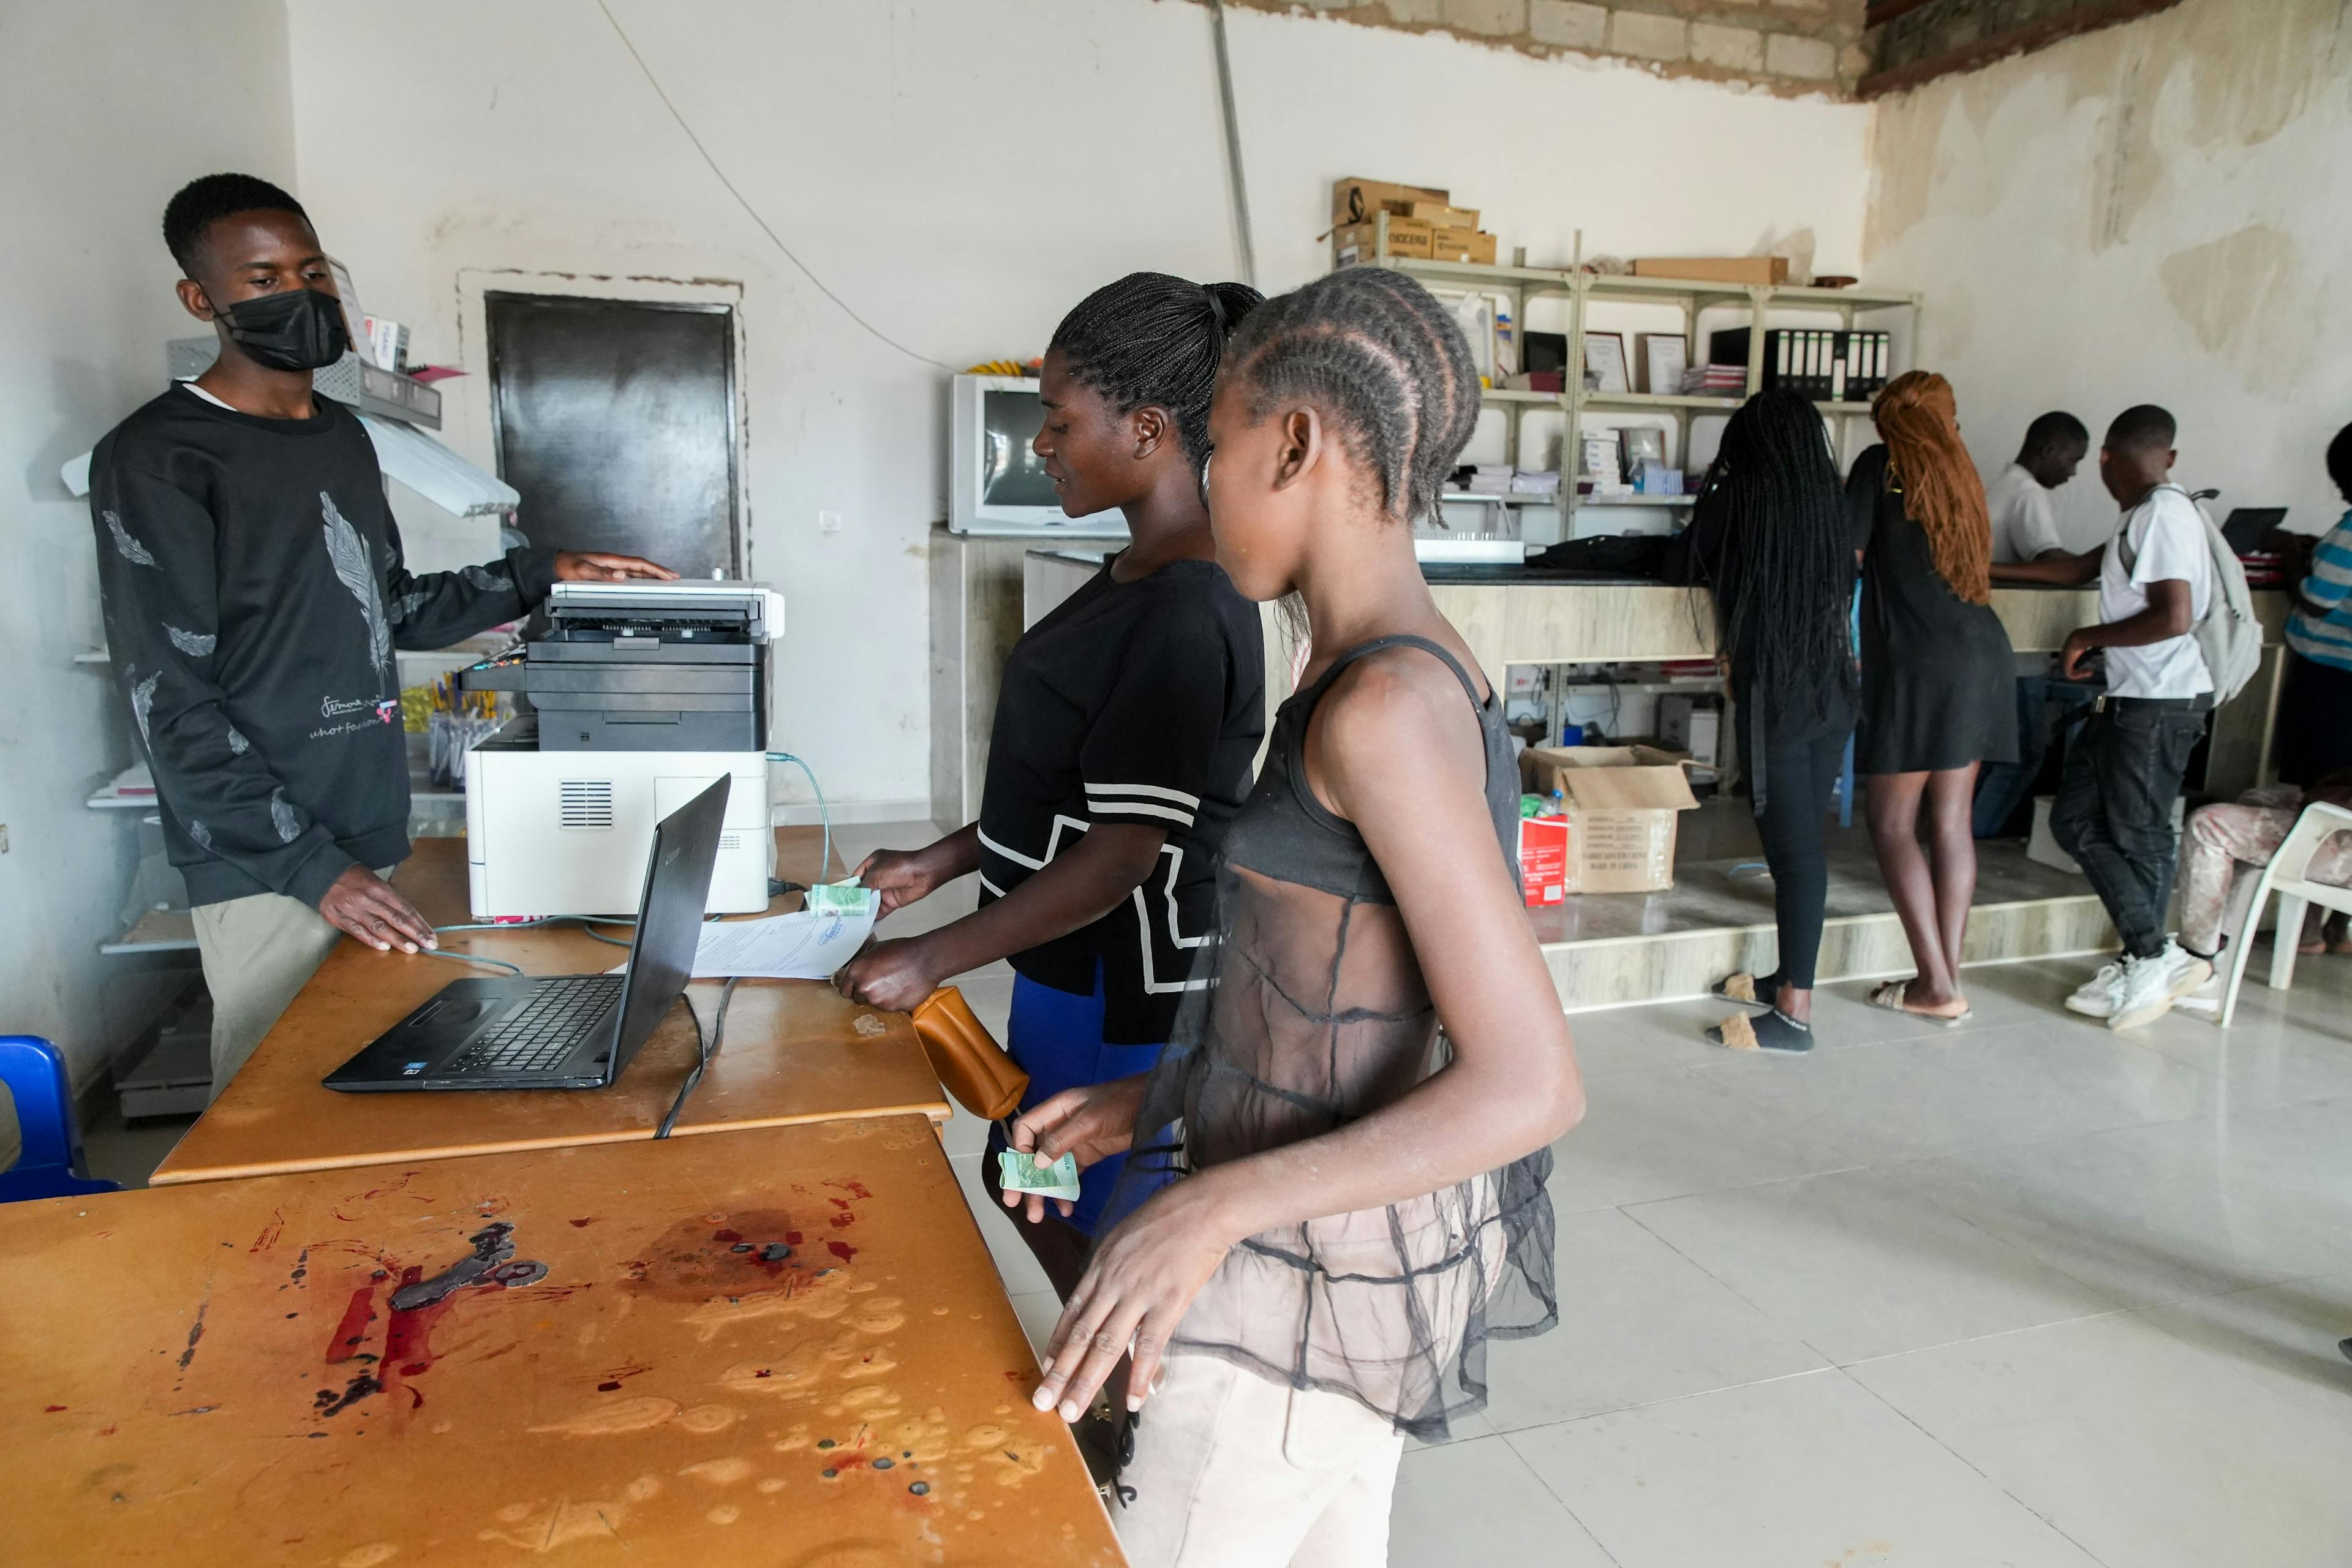 Customers come here to print or copy official documents and photos. Moving to a nearby town can be a first step in a longer migration journey. Young Africans may dream of far-off opportunities, but many lack the means to pursue them.